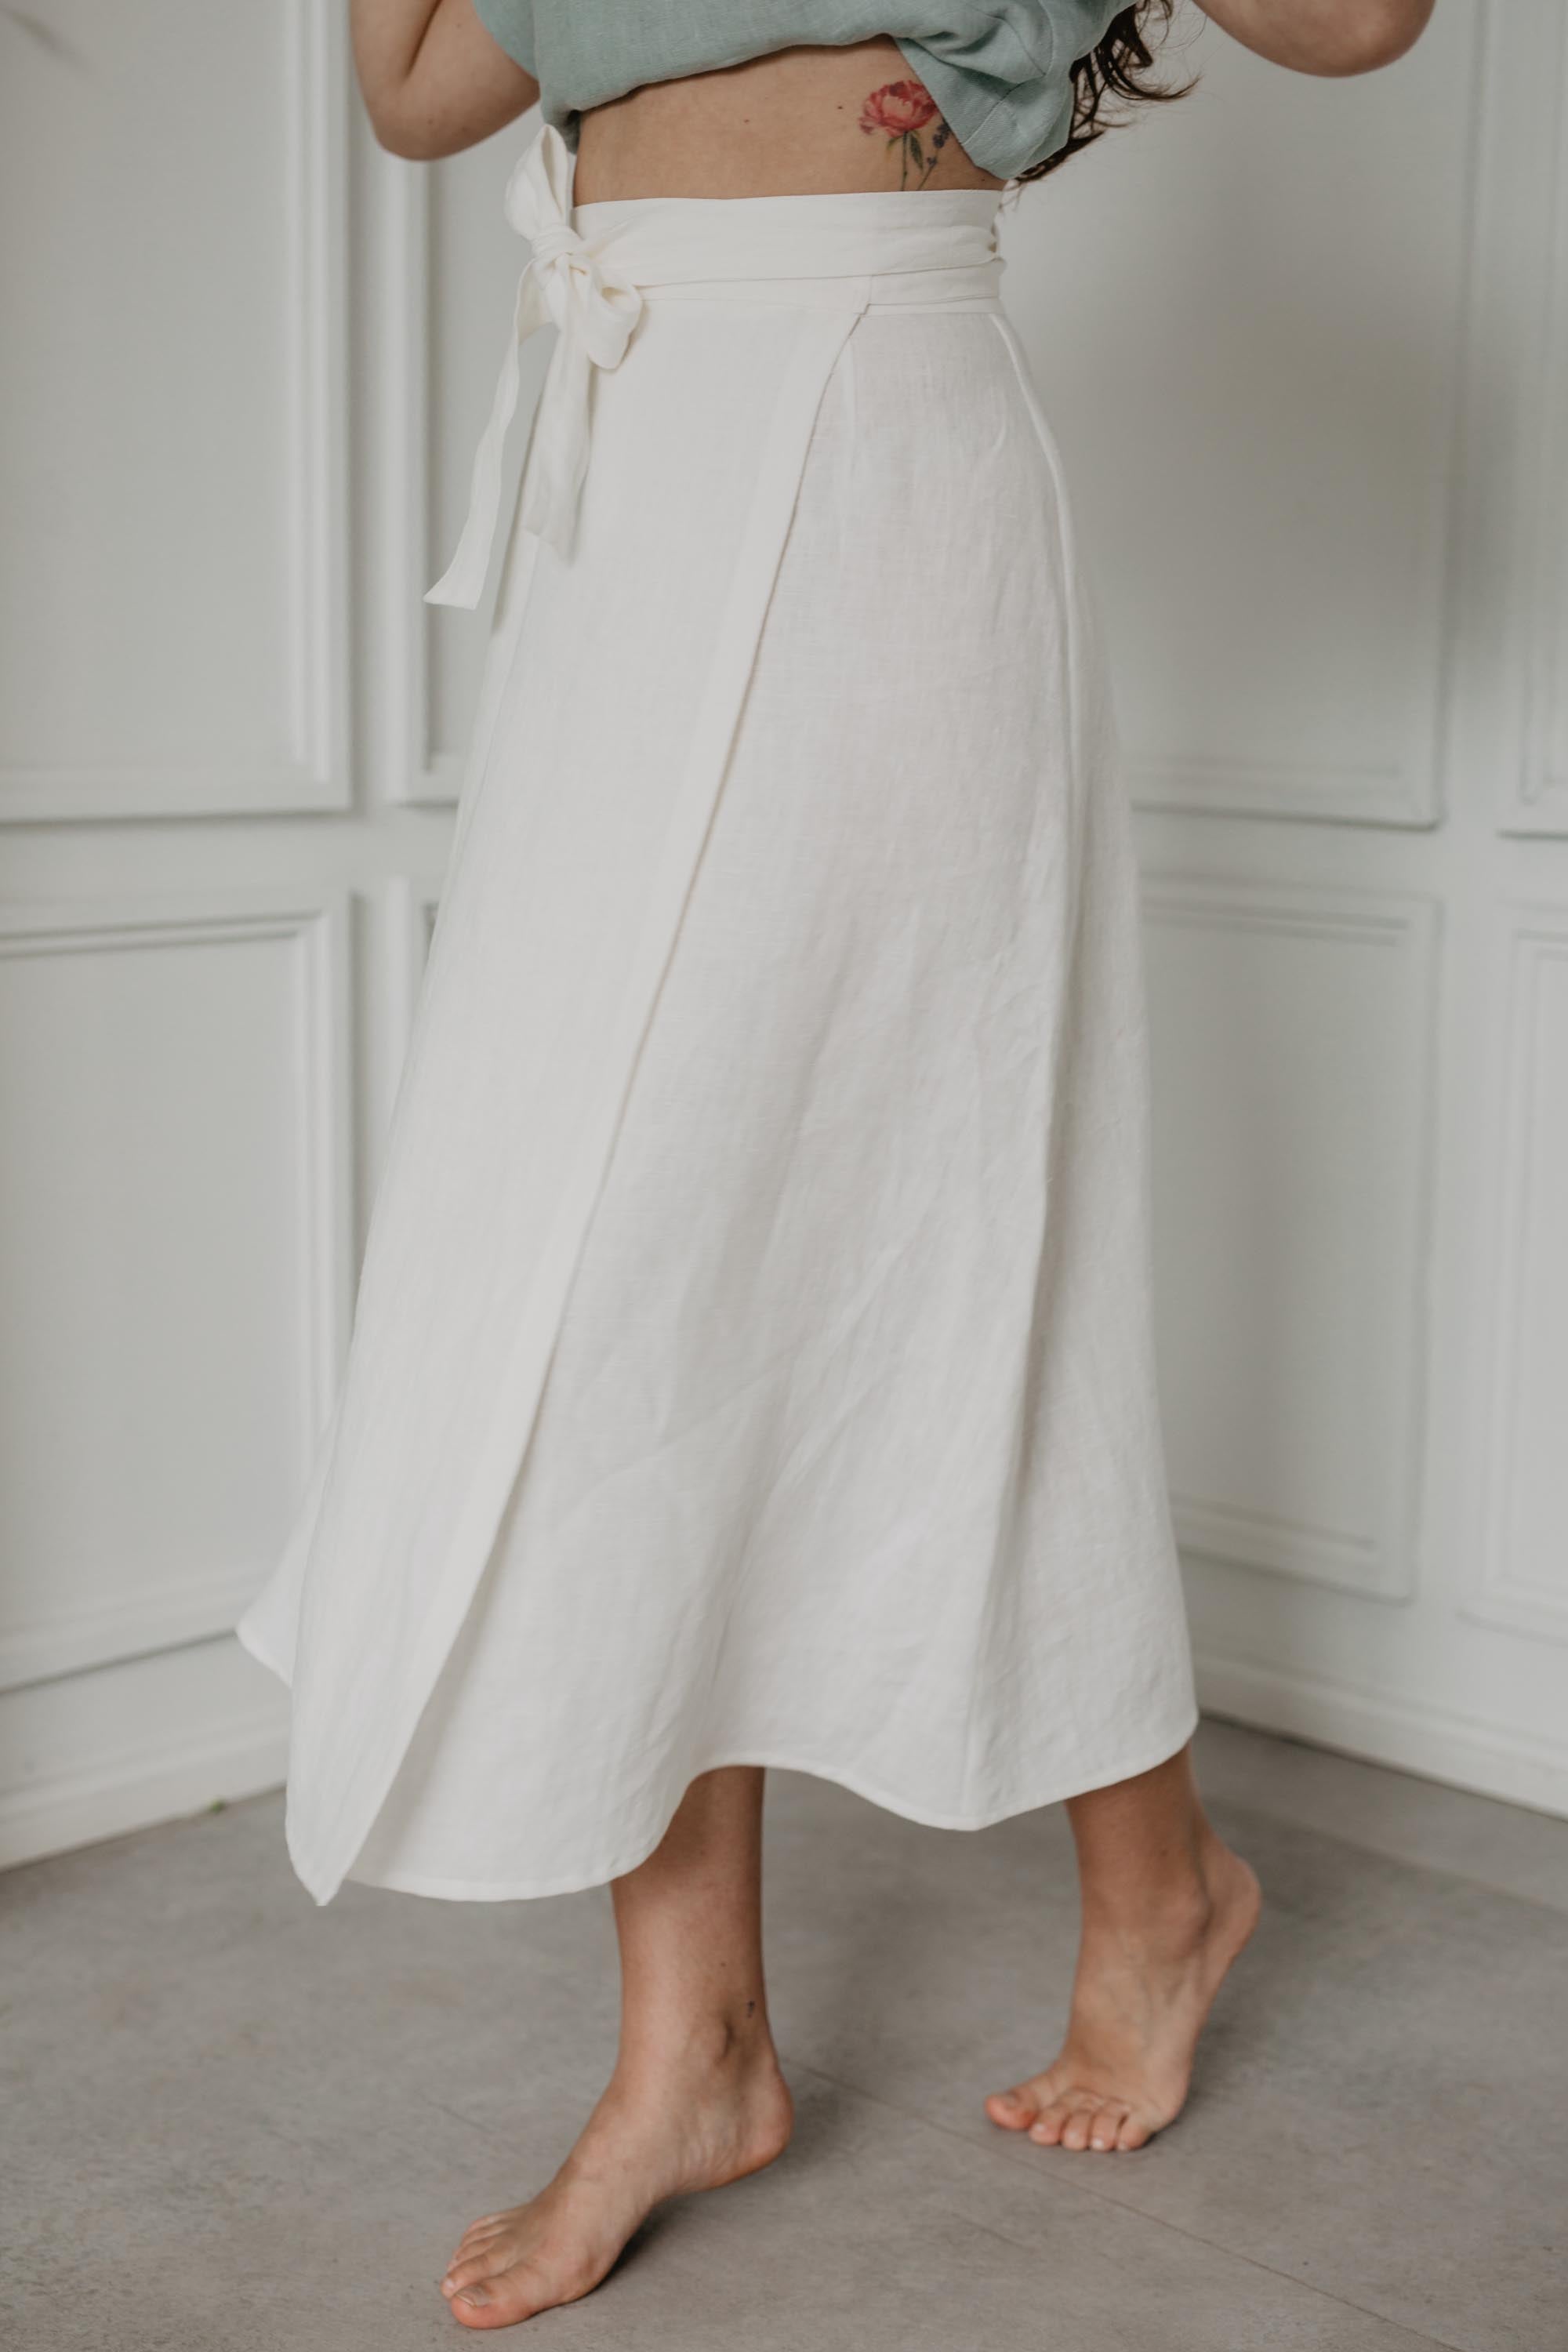 Side Of White Linen Wrap Skirt Close Up